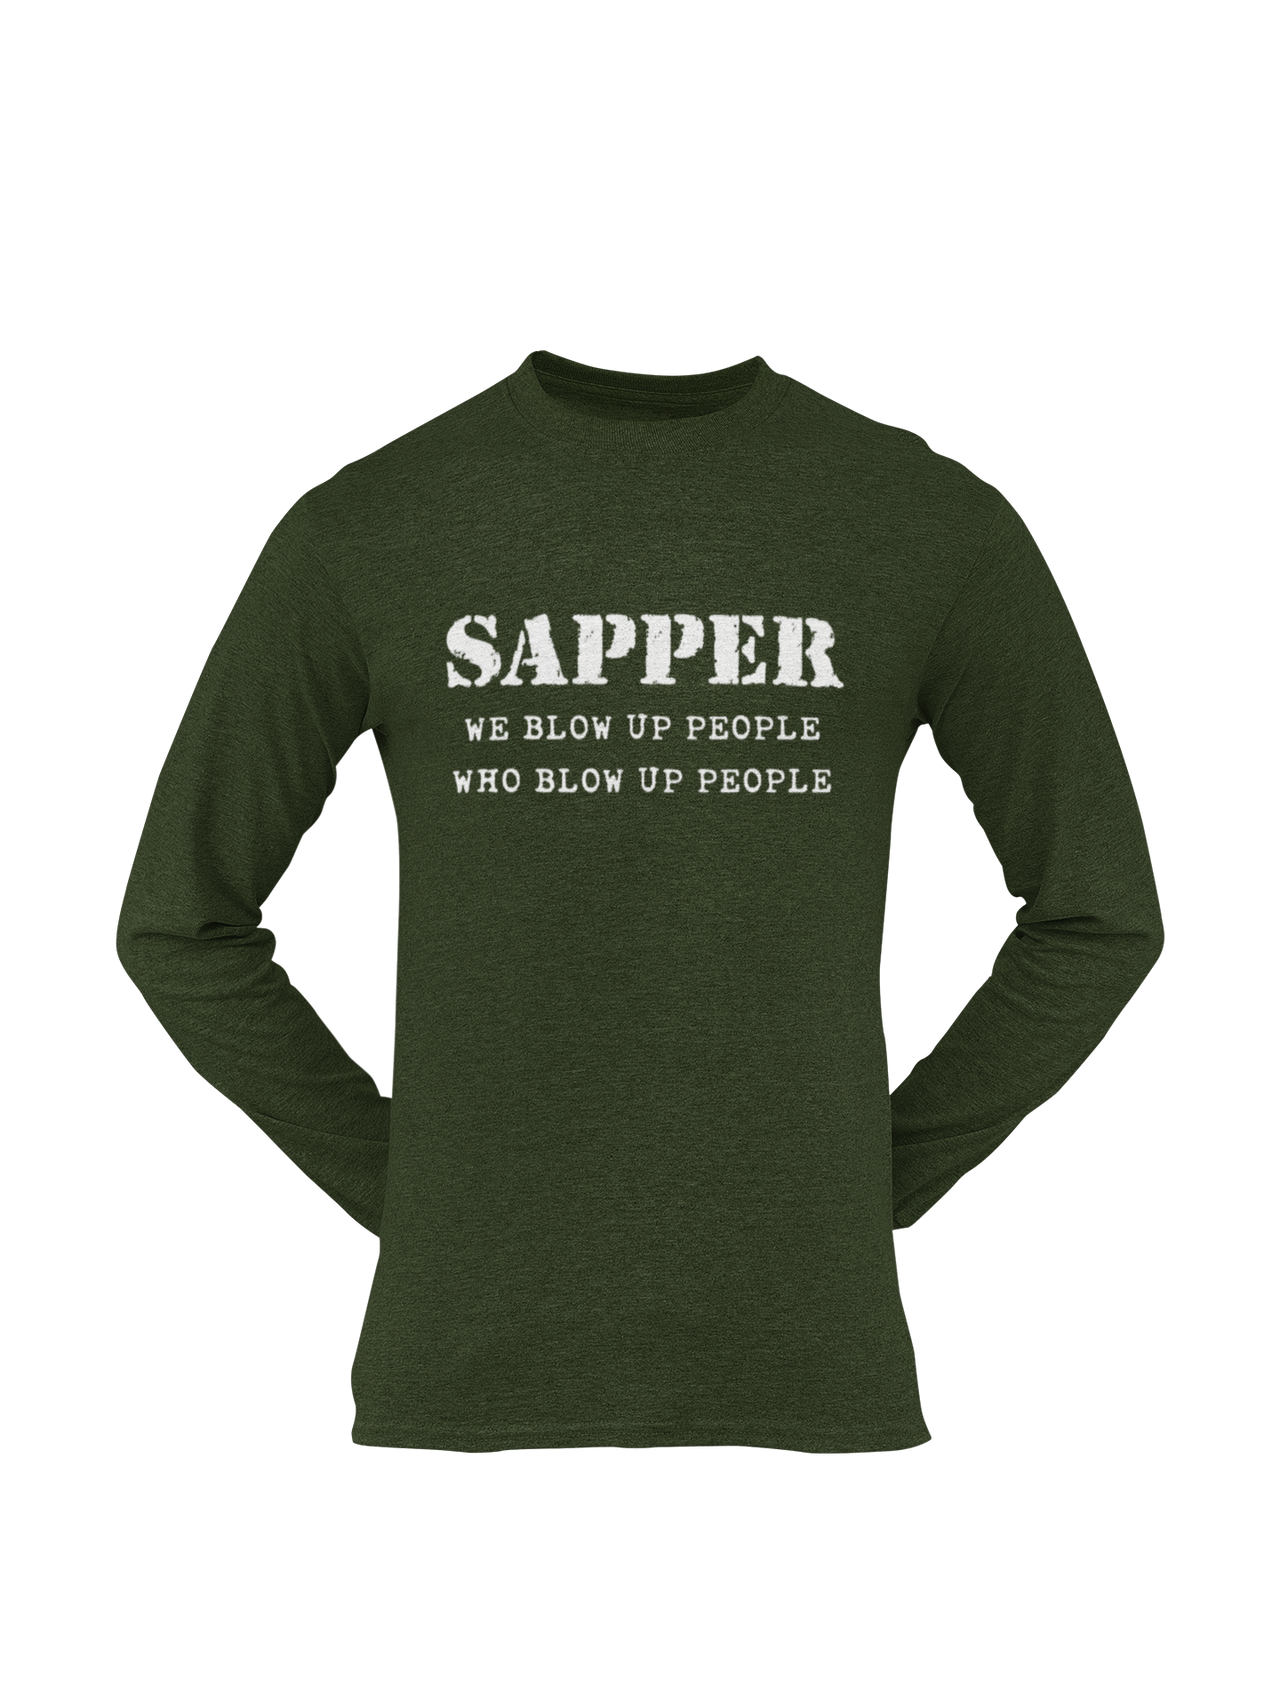 Sapper T-shirt - We Blow Up People, Who Blow Up People (Men)